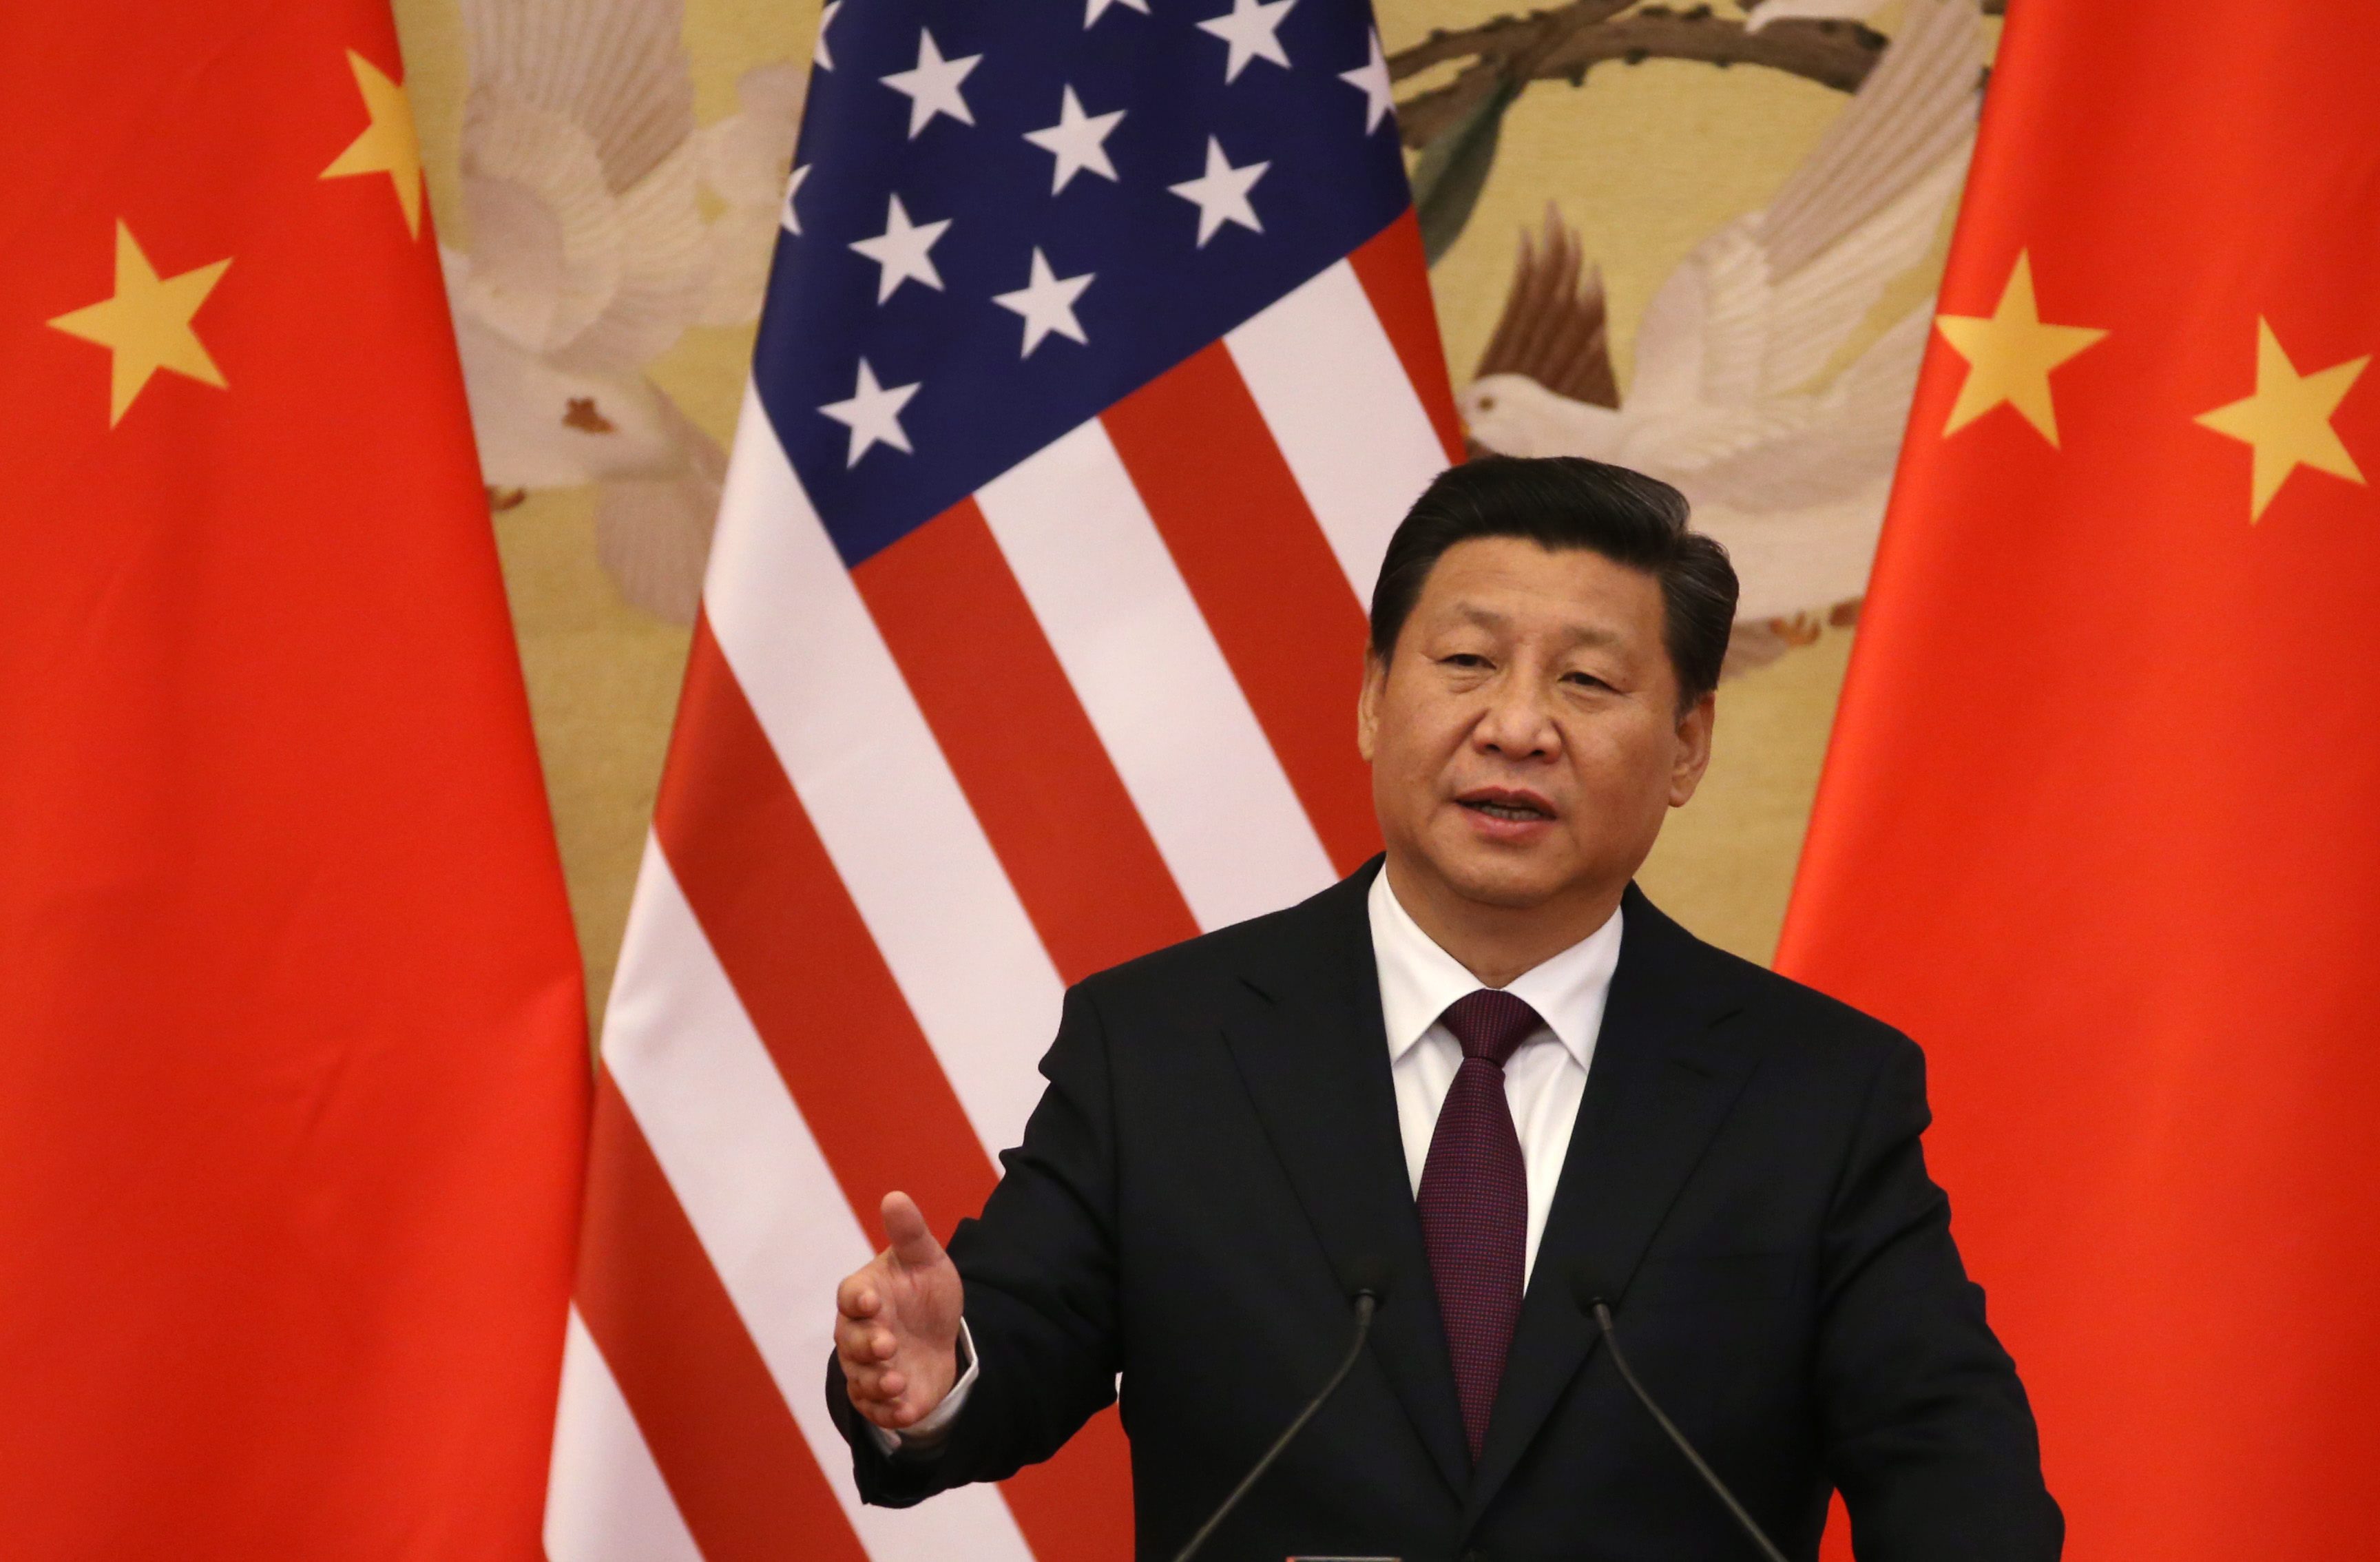 President Xi Jinping said reporters should look at their own work to see why they may not be welcome in China. Photo: EPA